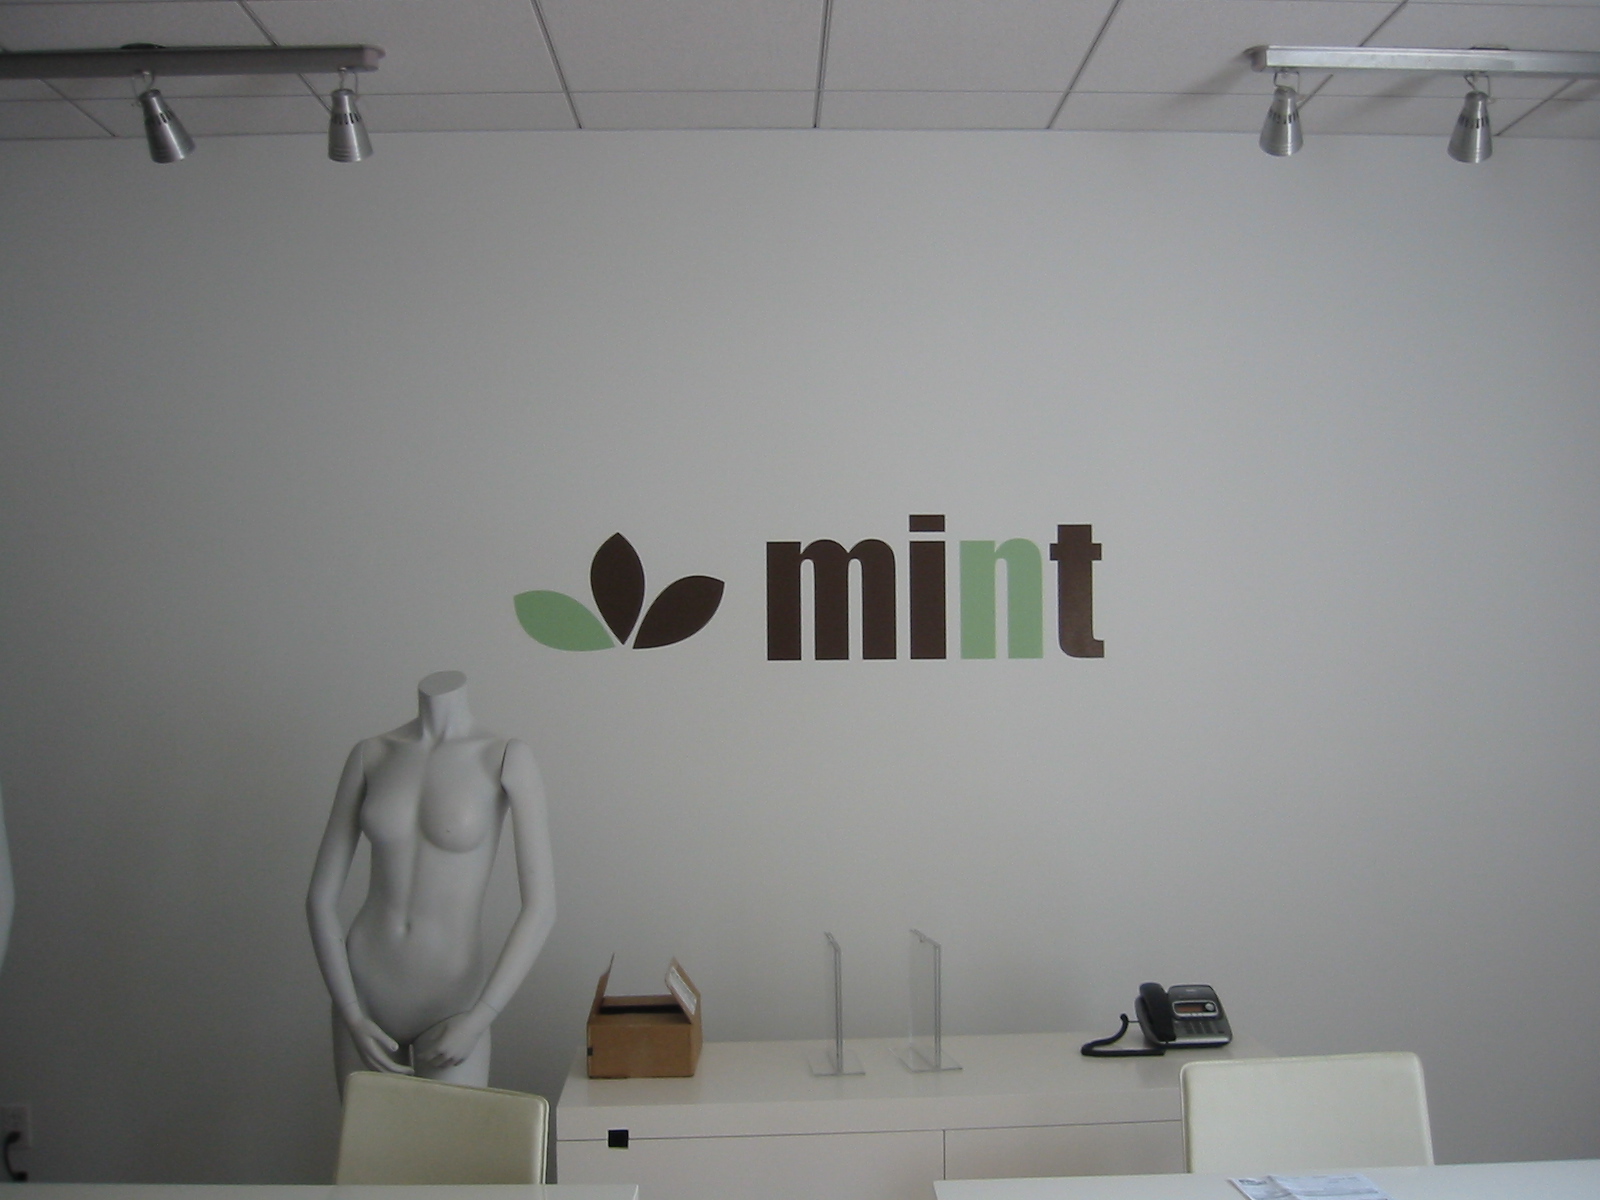 Vinyl wall graphics for Mint